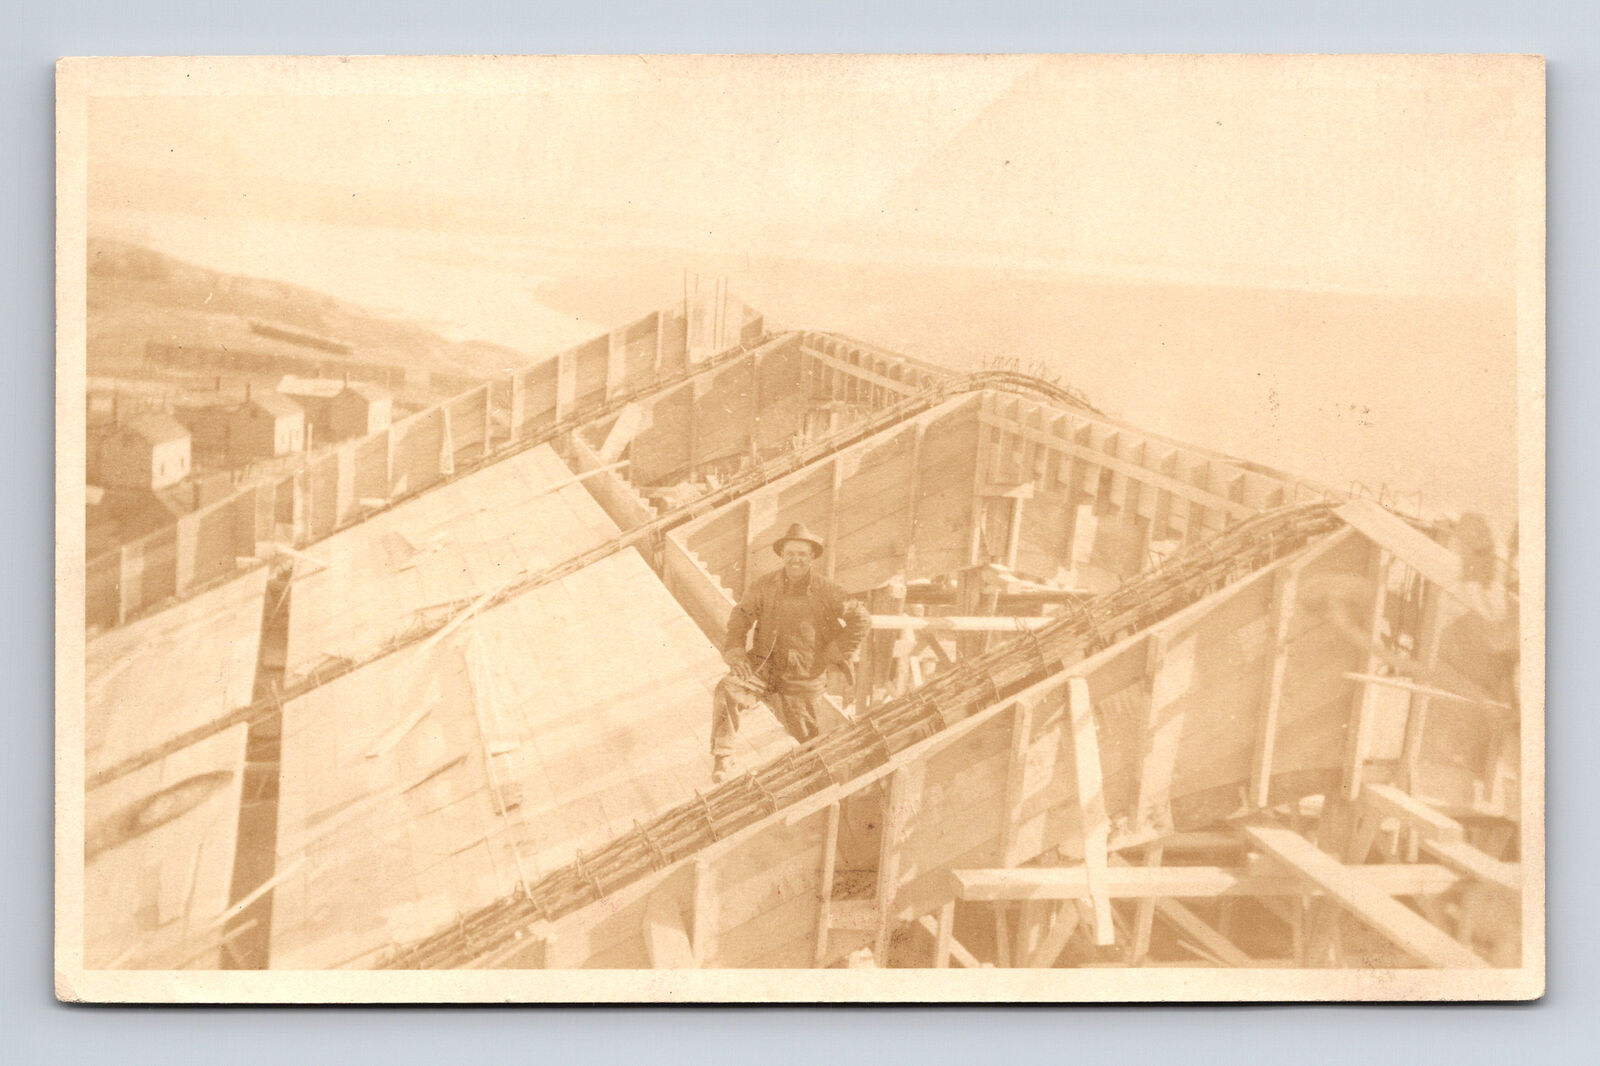 RPPC Roofer Worker Man Posing For Photo Large Building by Sea Postcard